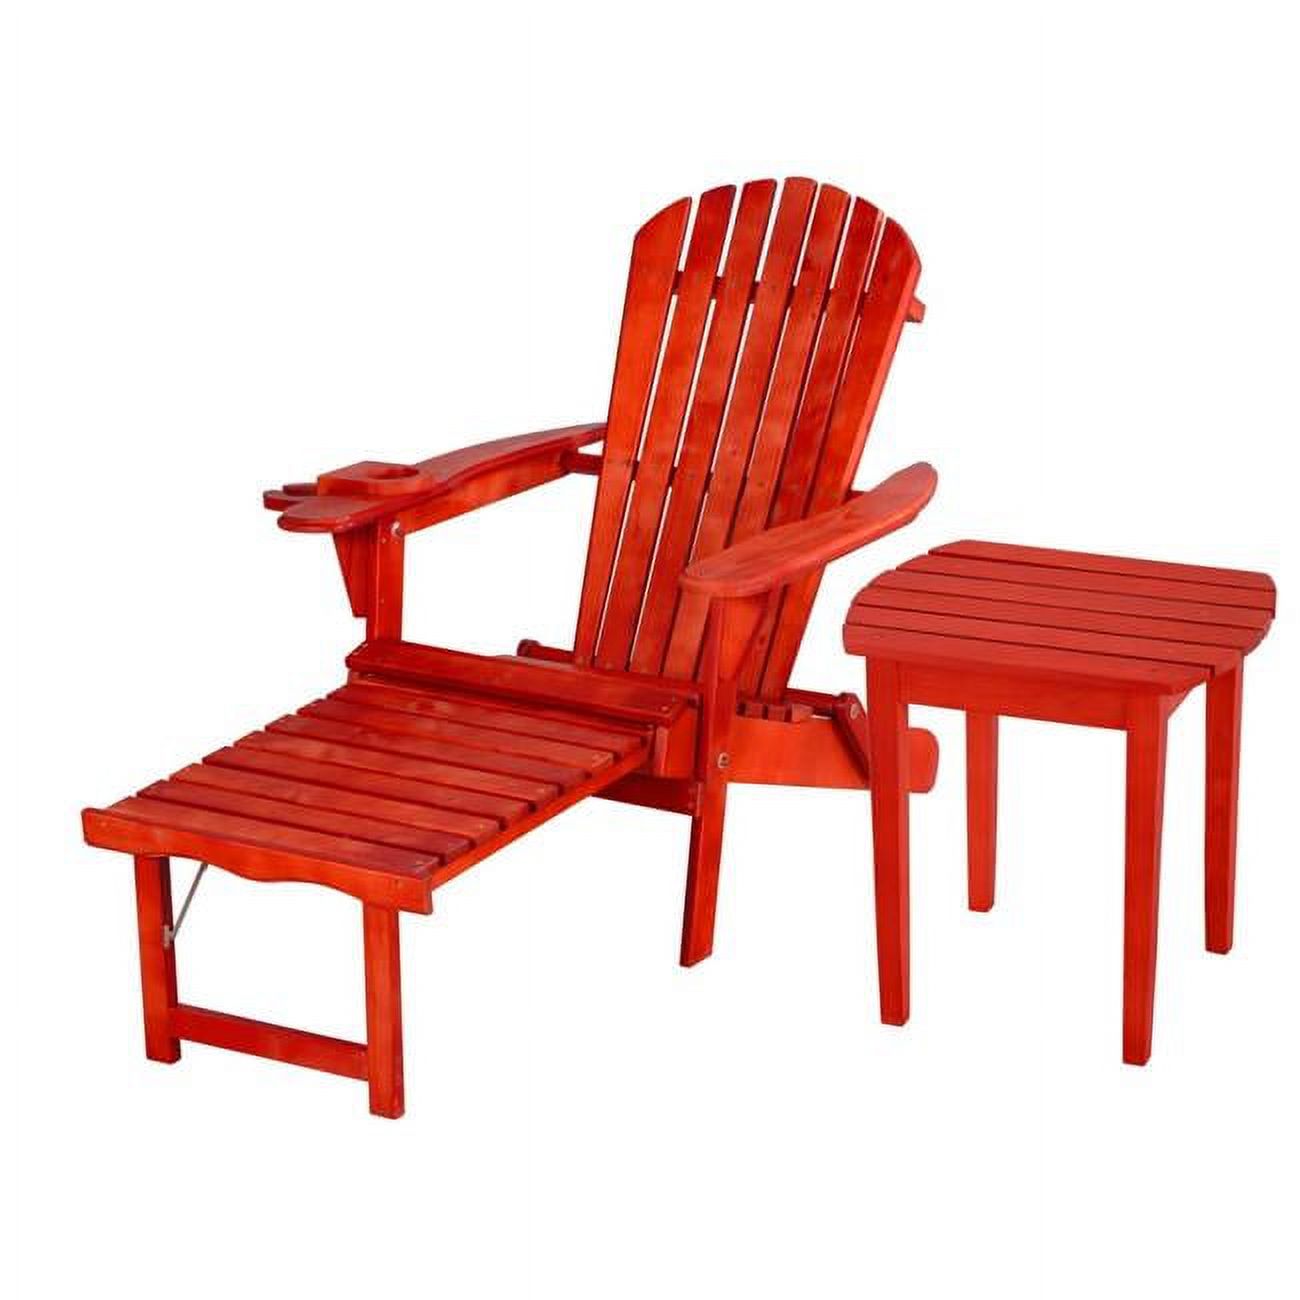 W Unlimited  Oceanic Collection Outdoor Bistro Adirondack Chaise Lounge Foldable Chair Set with Cup & Glass Holder & Built in Ottoman, Red - Wood - 2 Piece - image 1 of 3